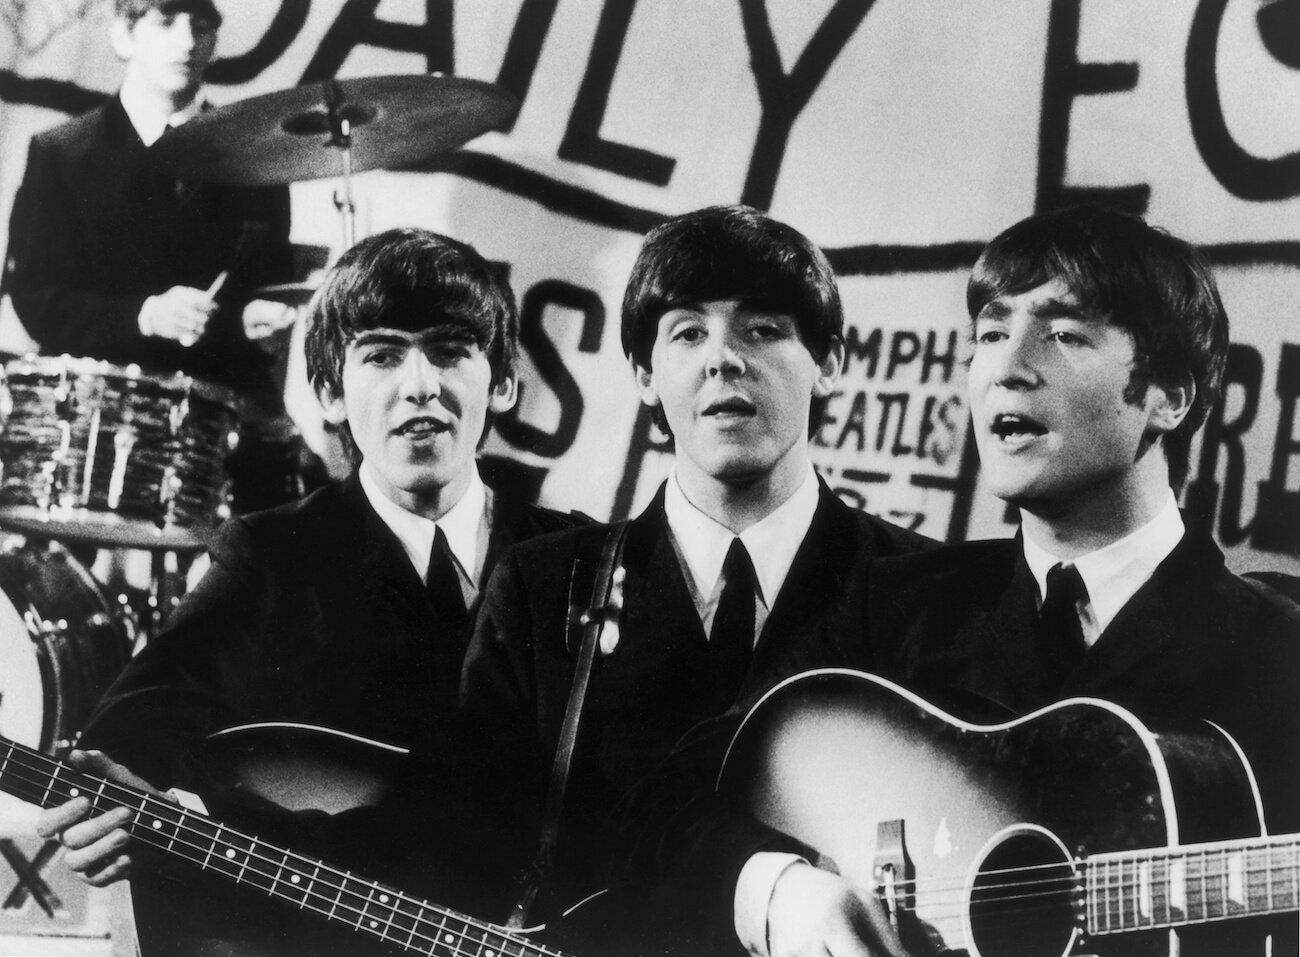 The Beatles, who released 'I Saw Her Standing There' in 1963.